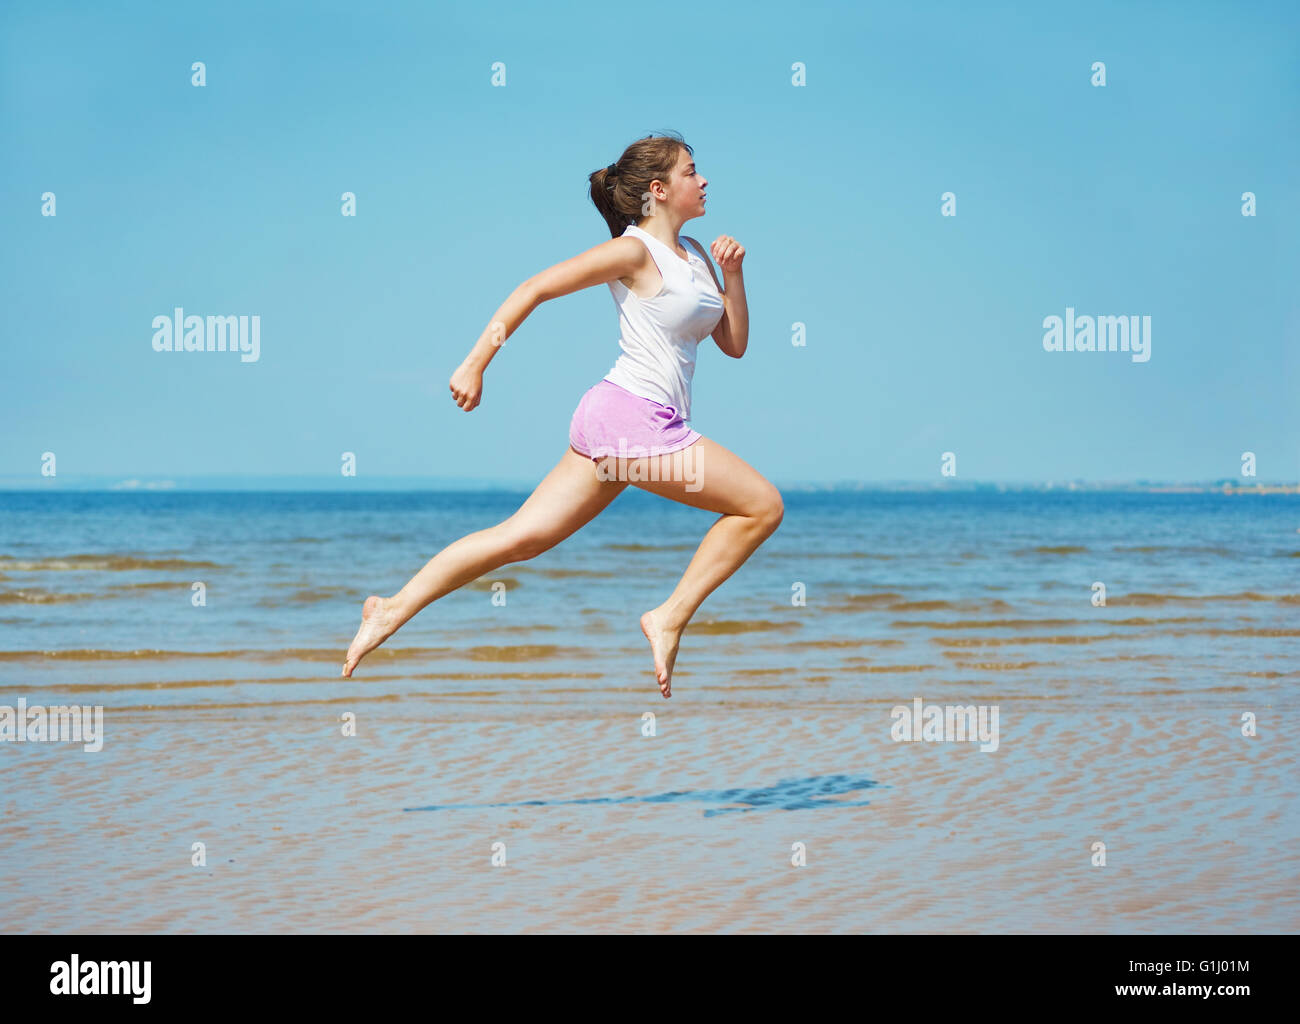 Attractive young woman running alone on the beach Stock Photo